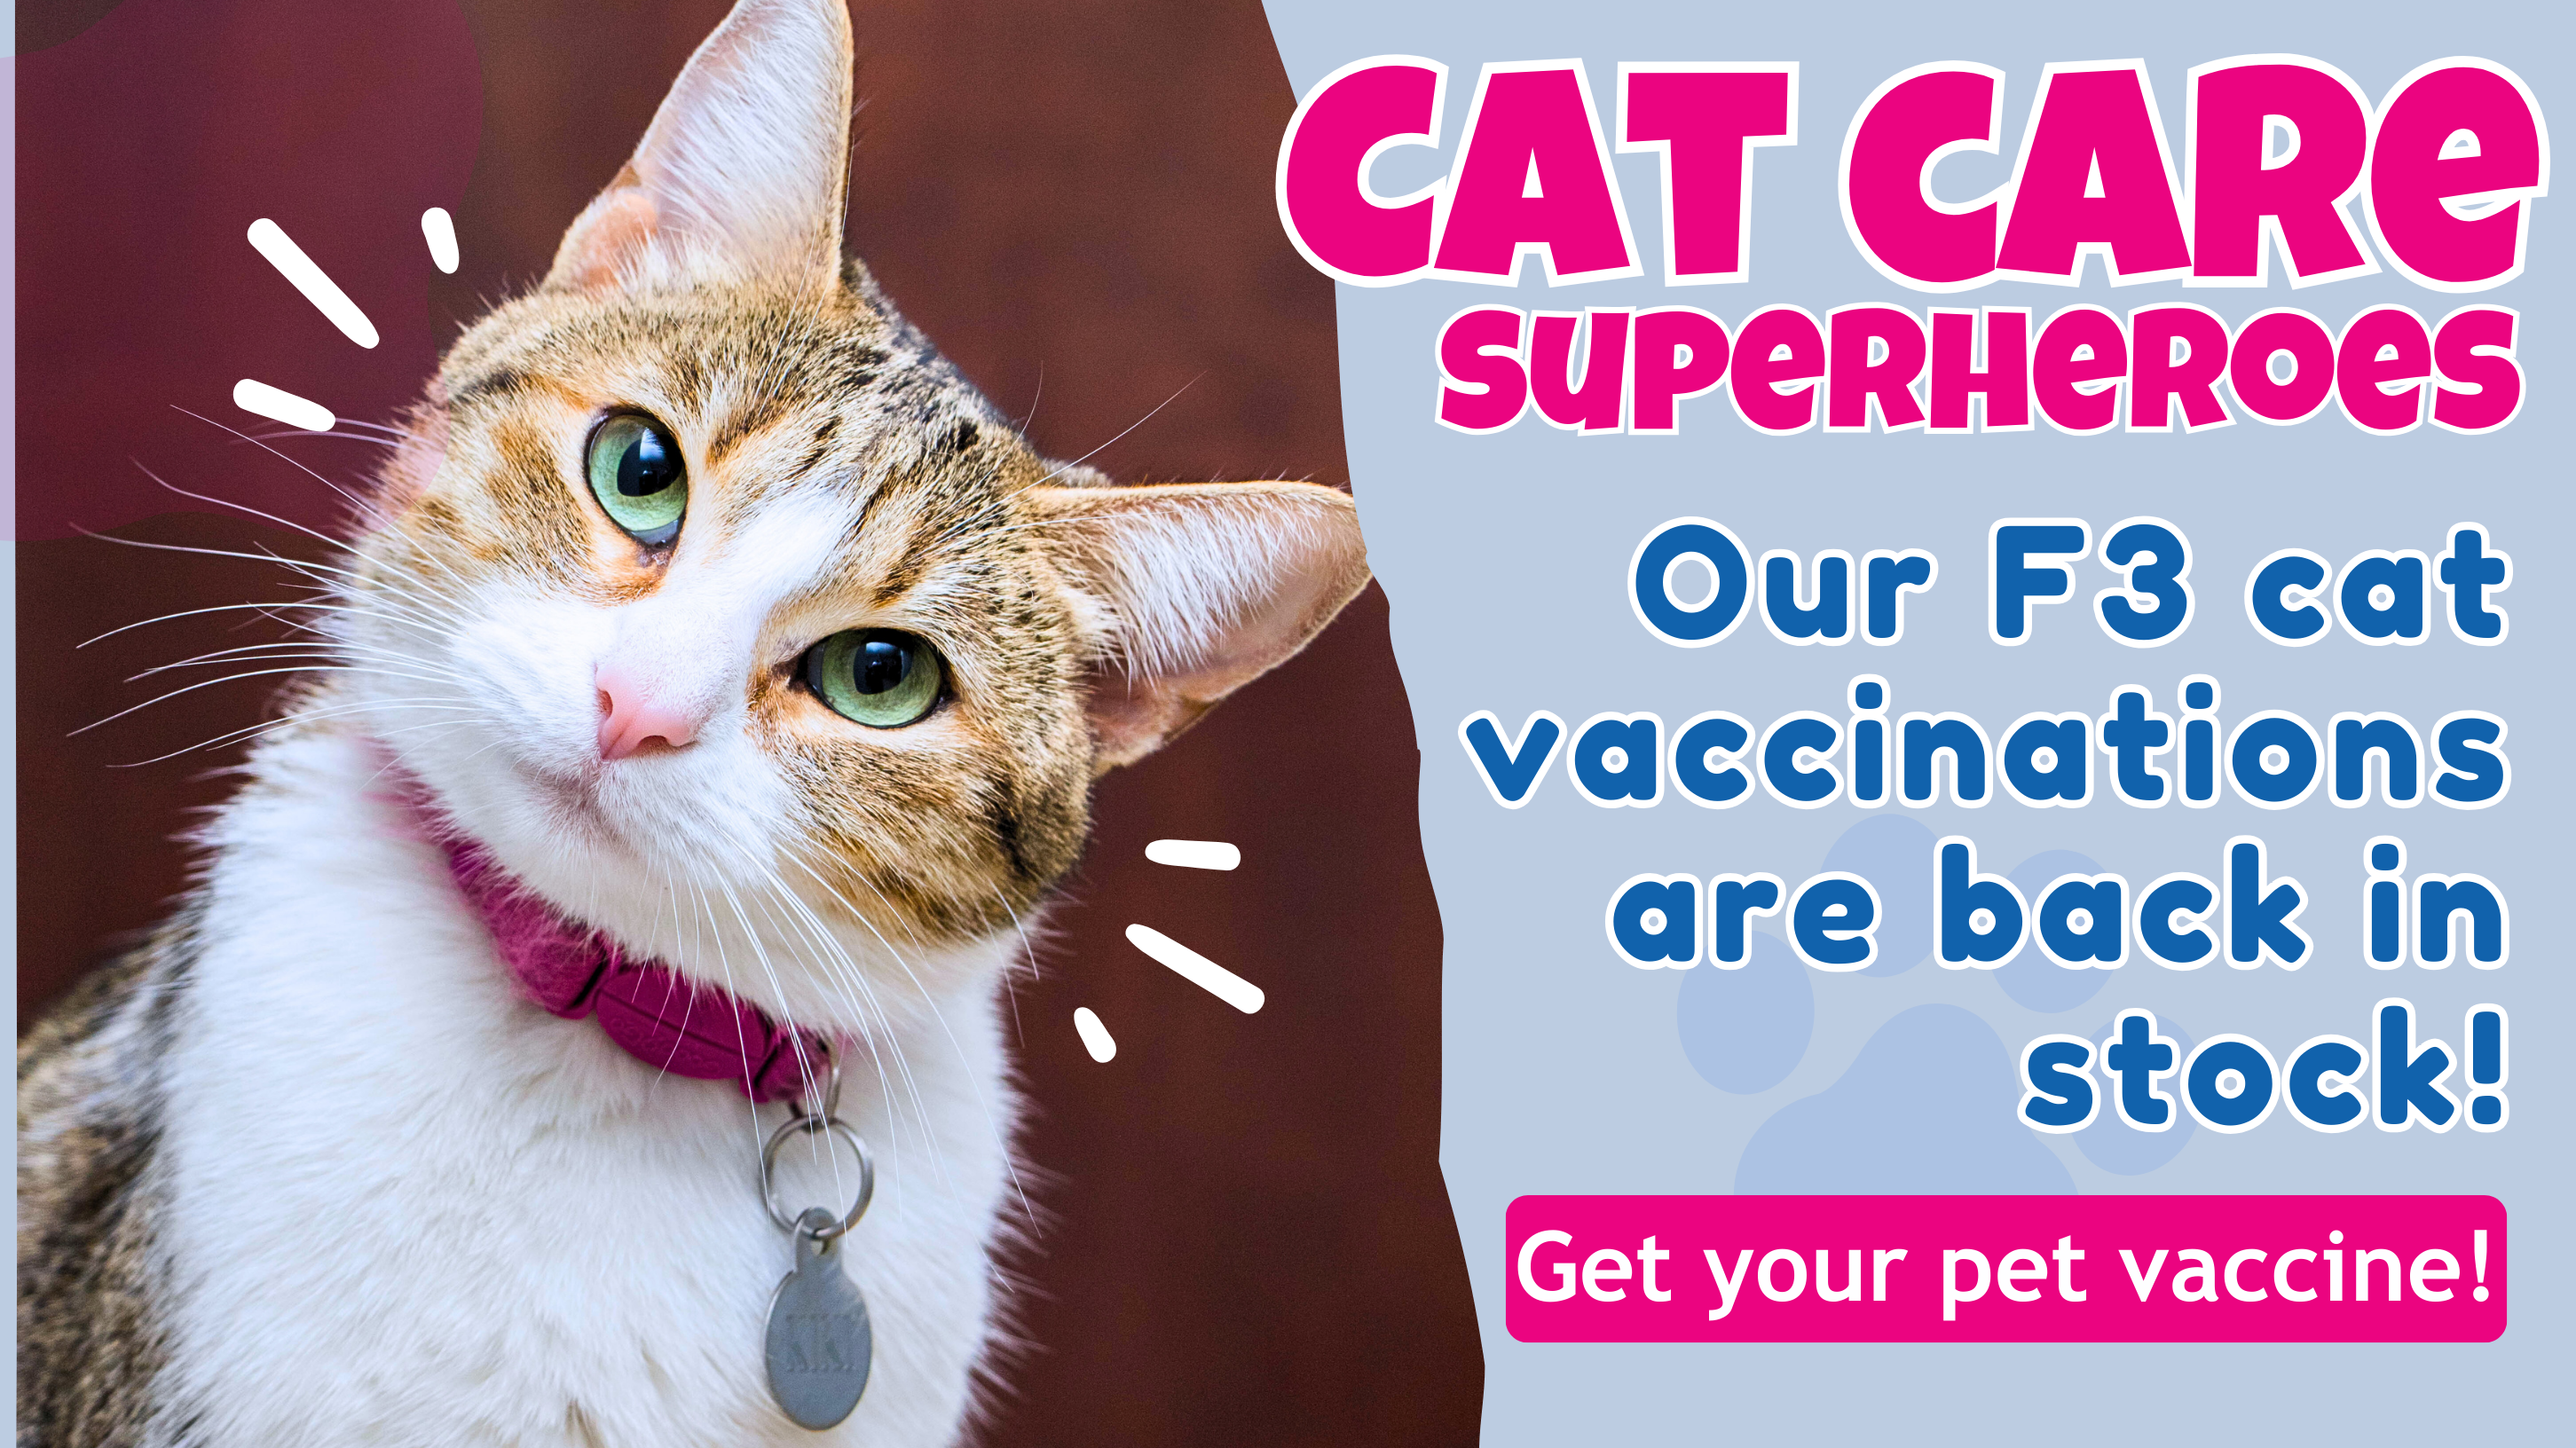 F3 cat vaccine is back on stock